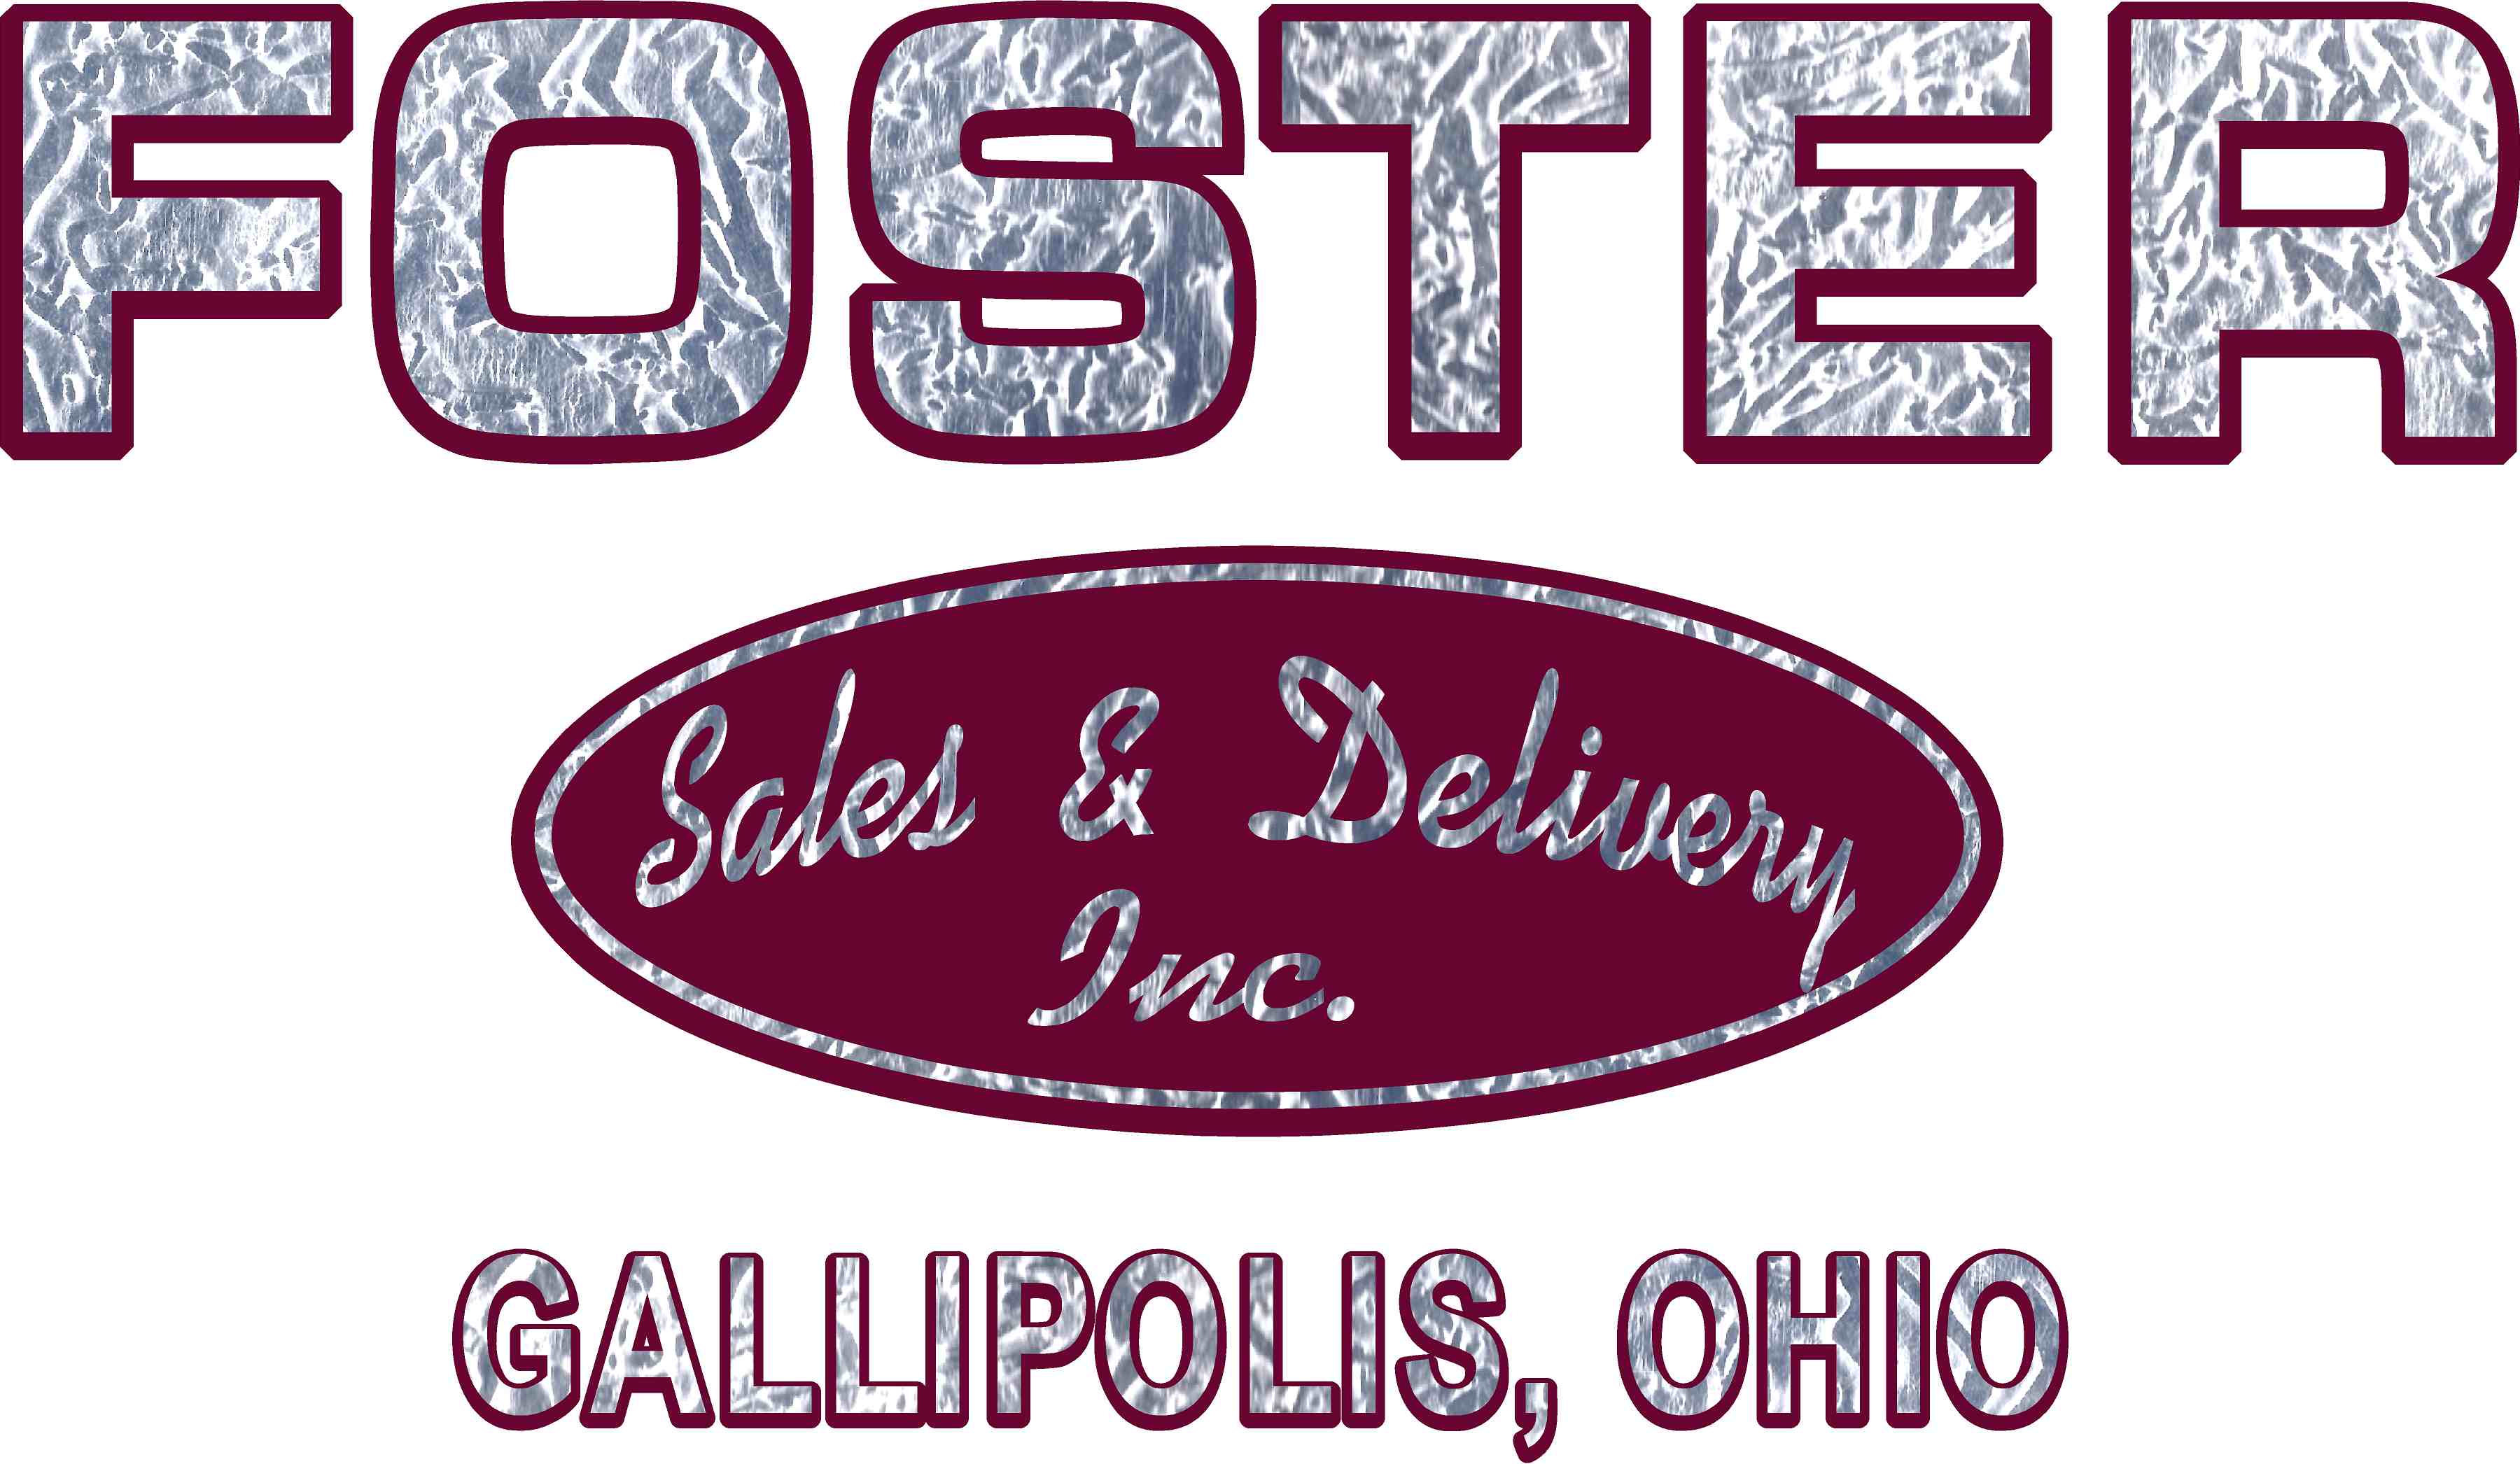 Foster Sales & Delivery, Inc.